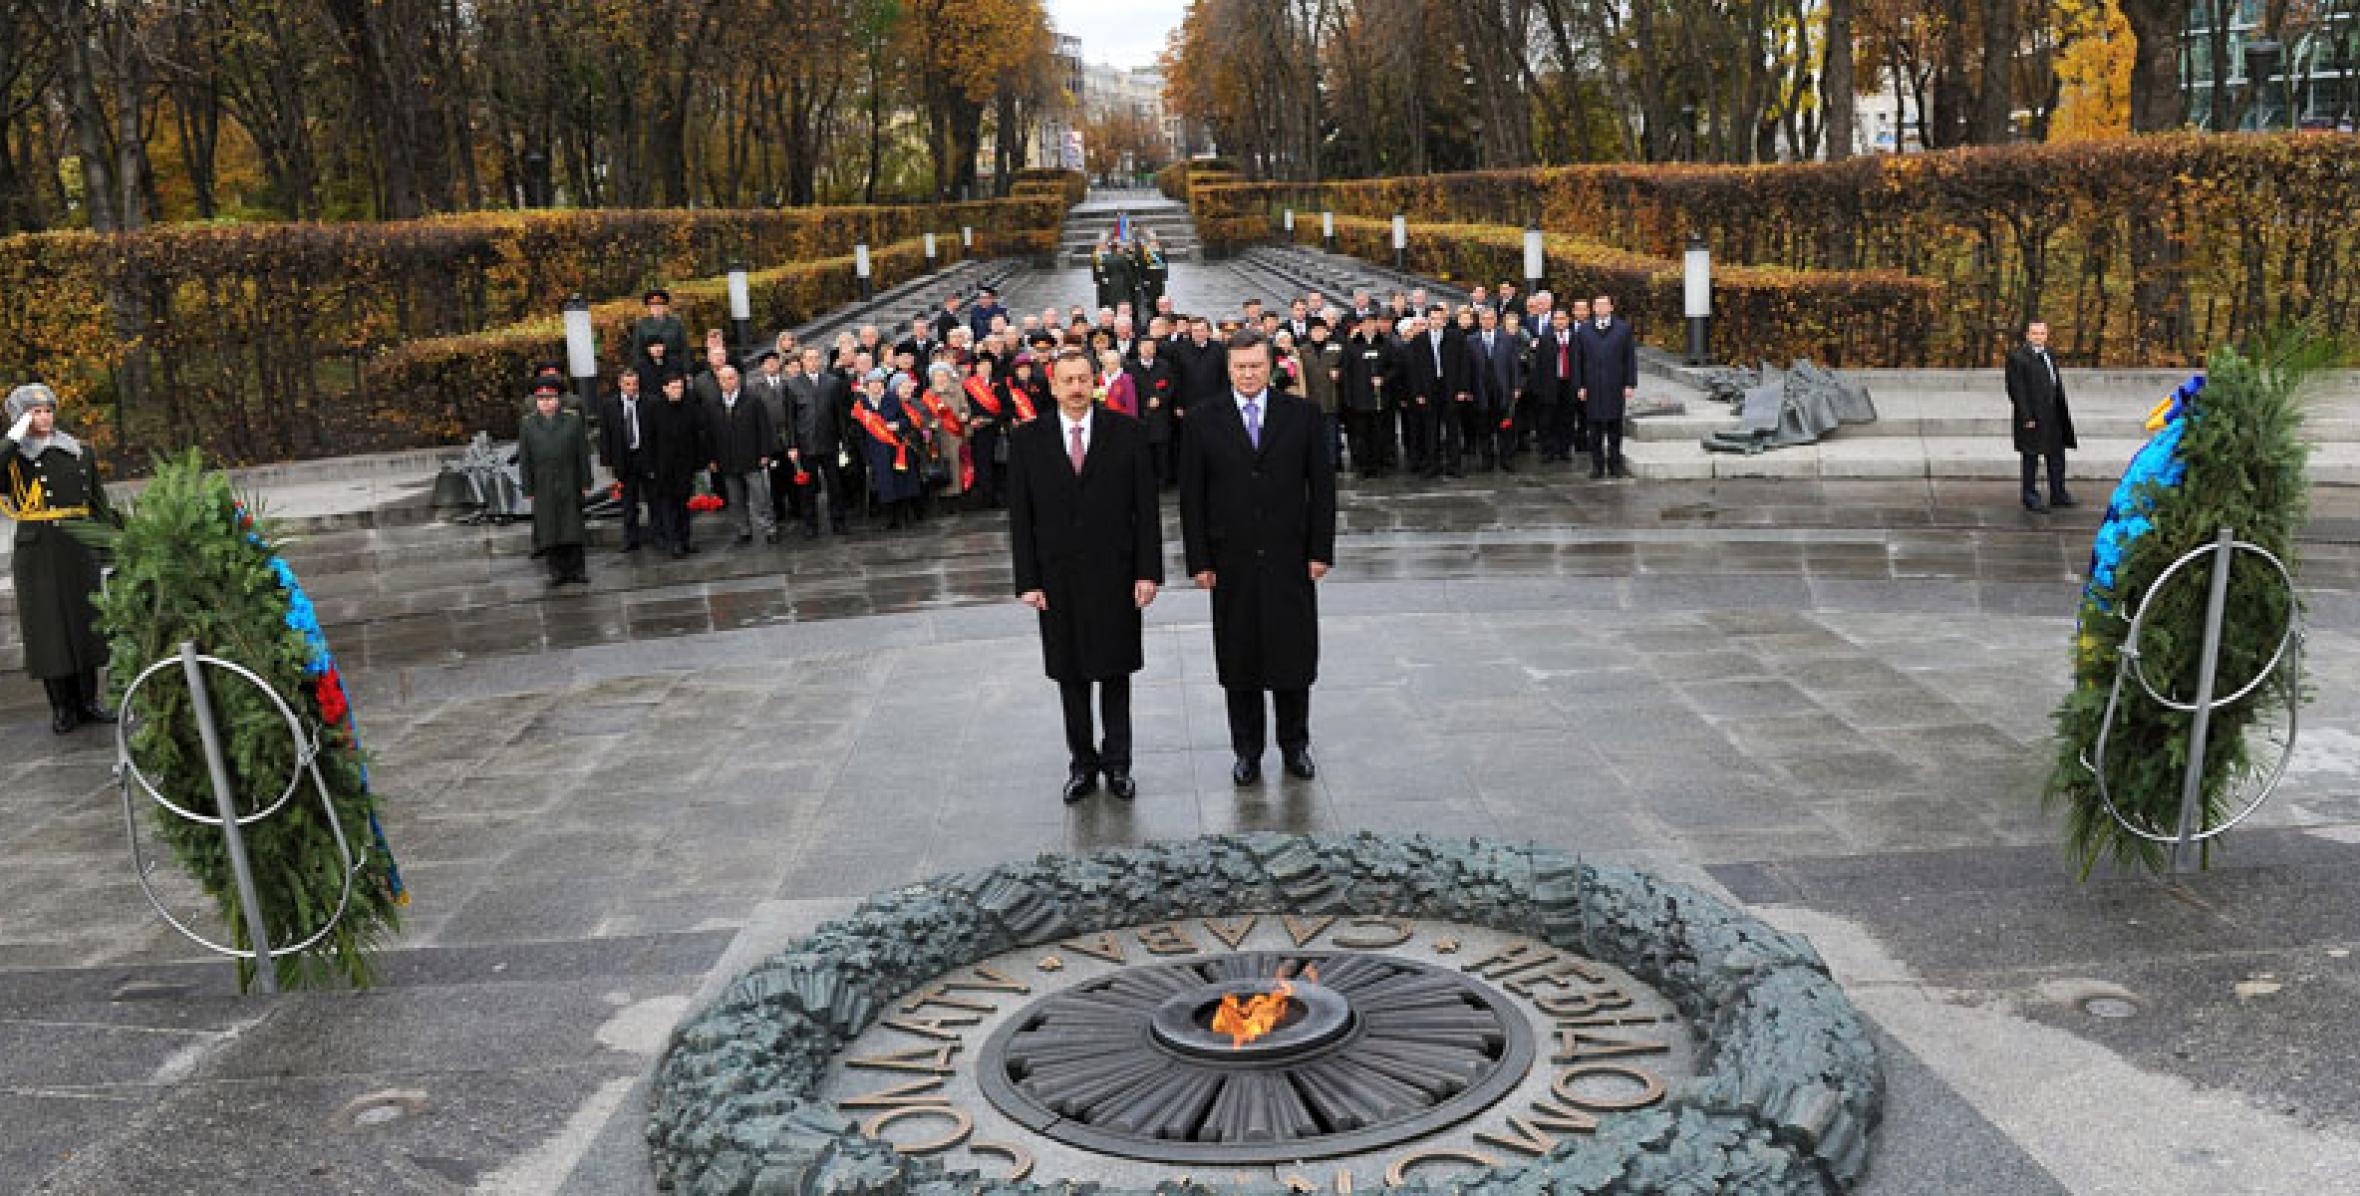 Ilham Aliyev and President of Ukraine Viktor Yanukovych pay tribute to the tomb of Unknown Warrior